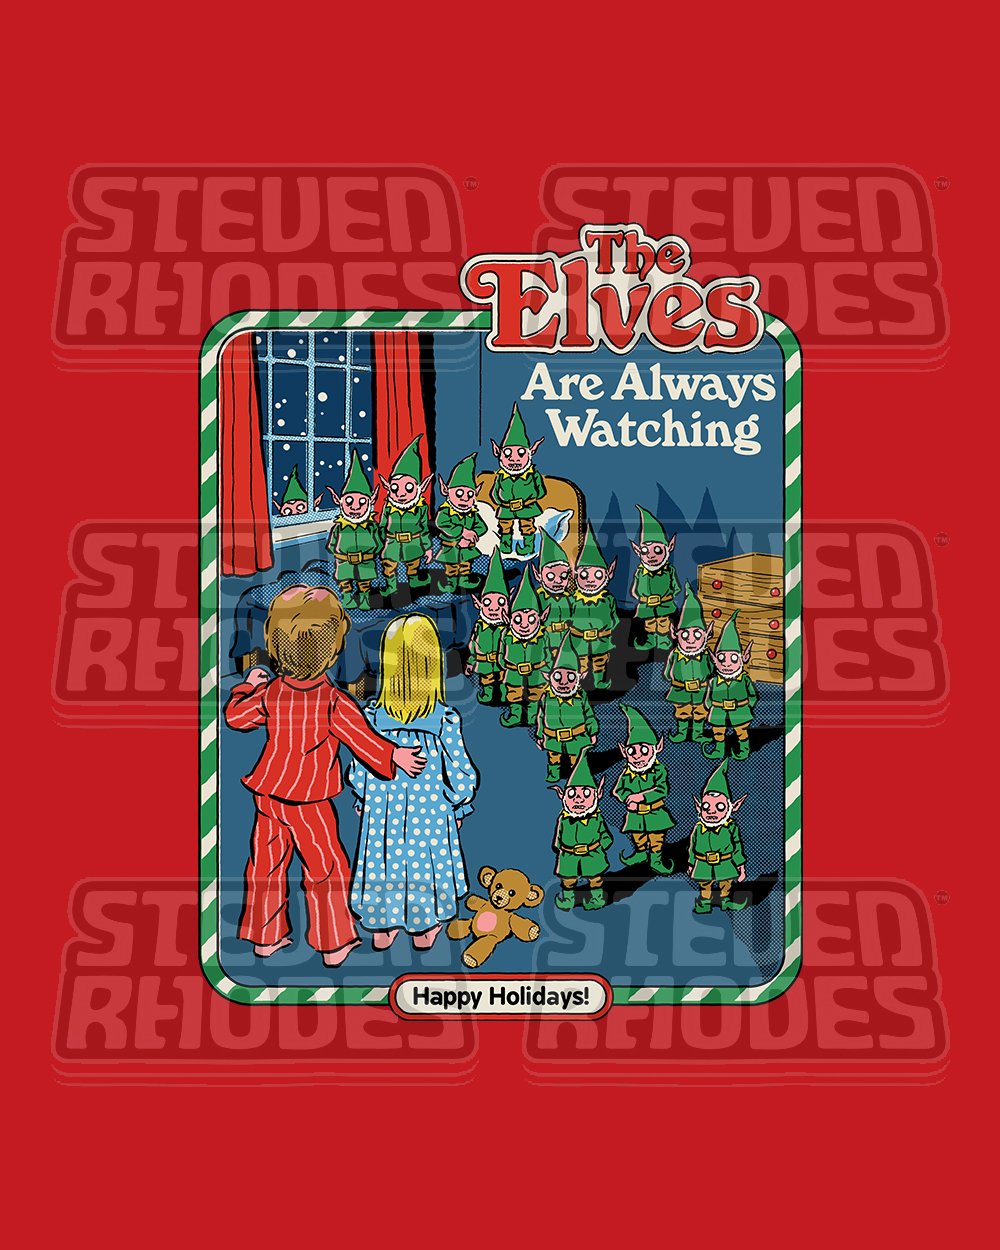 The Elves are Always Watching T-Shirt Australia Online #colour_red